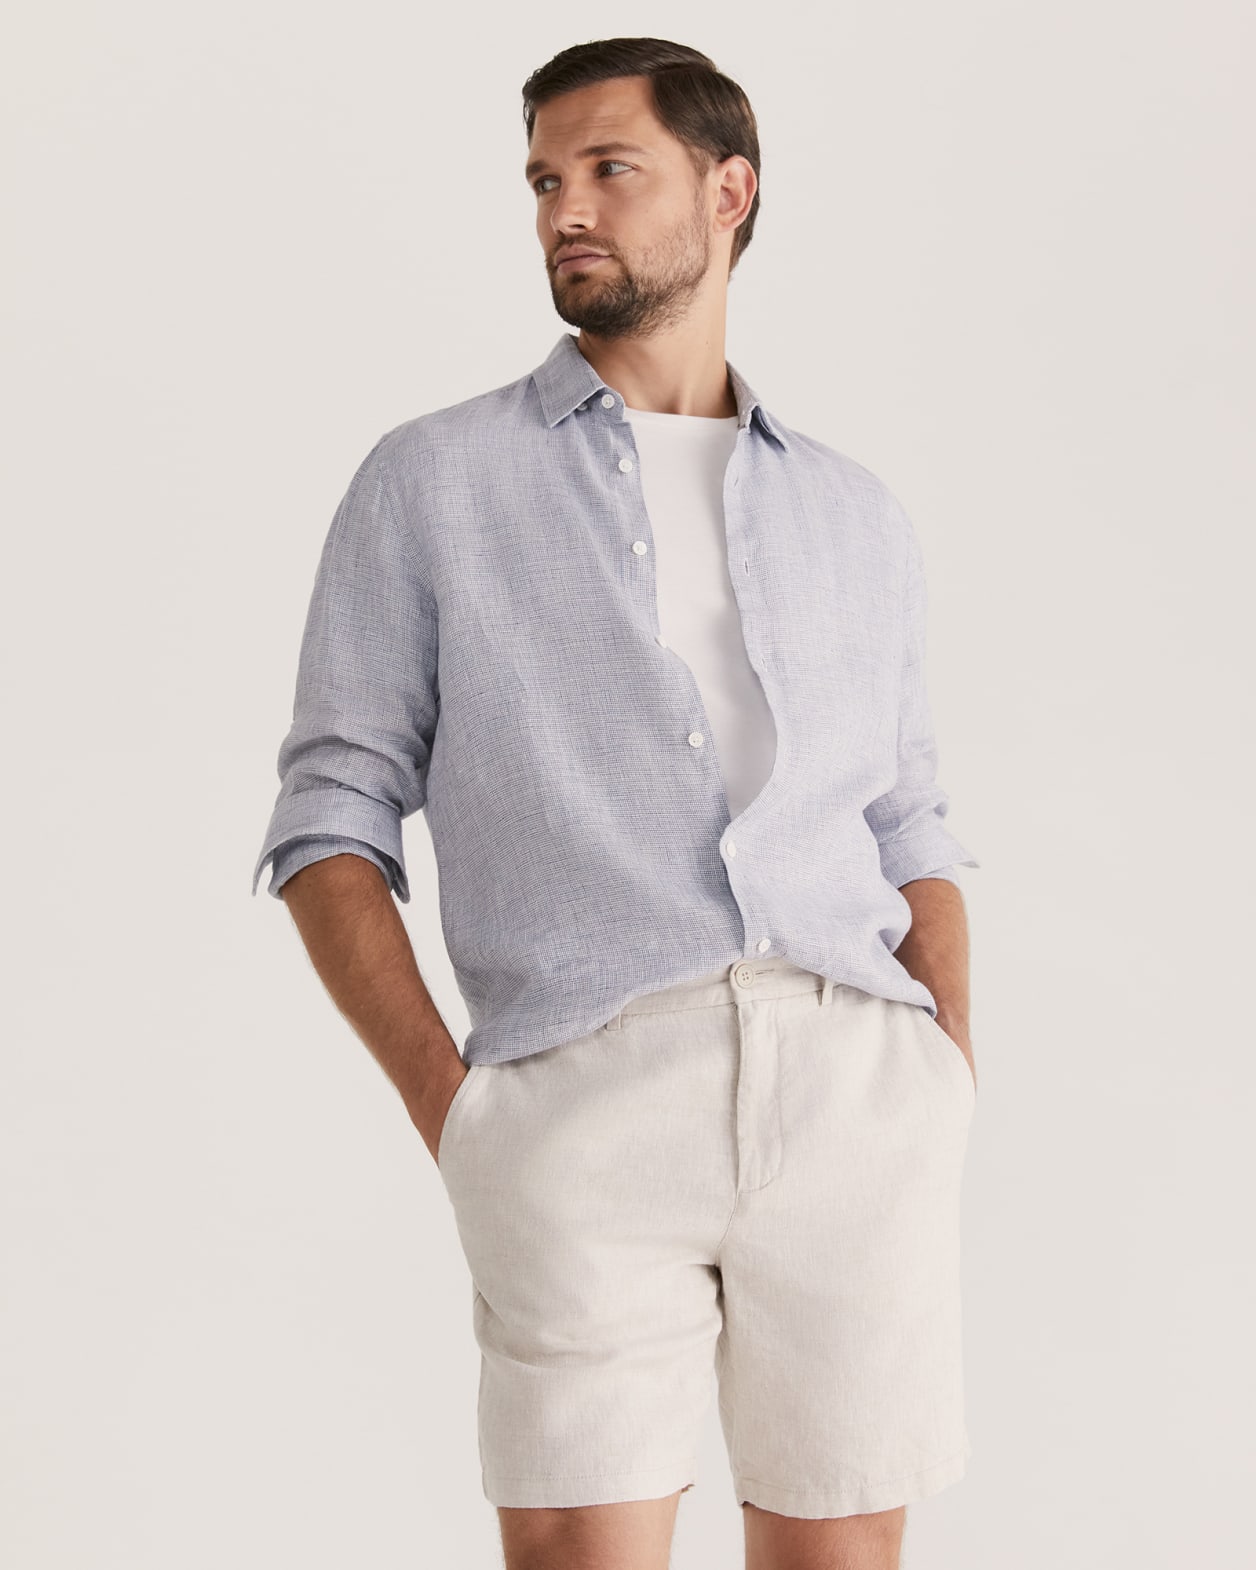 Anderson Classic Yarn Dyed Linen Shirt in STORM BLUE